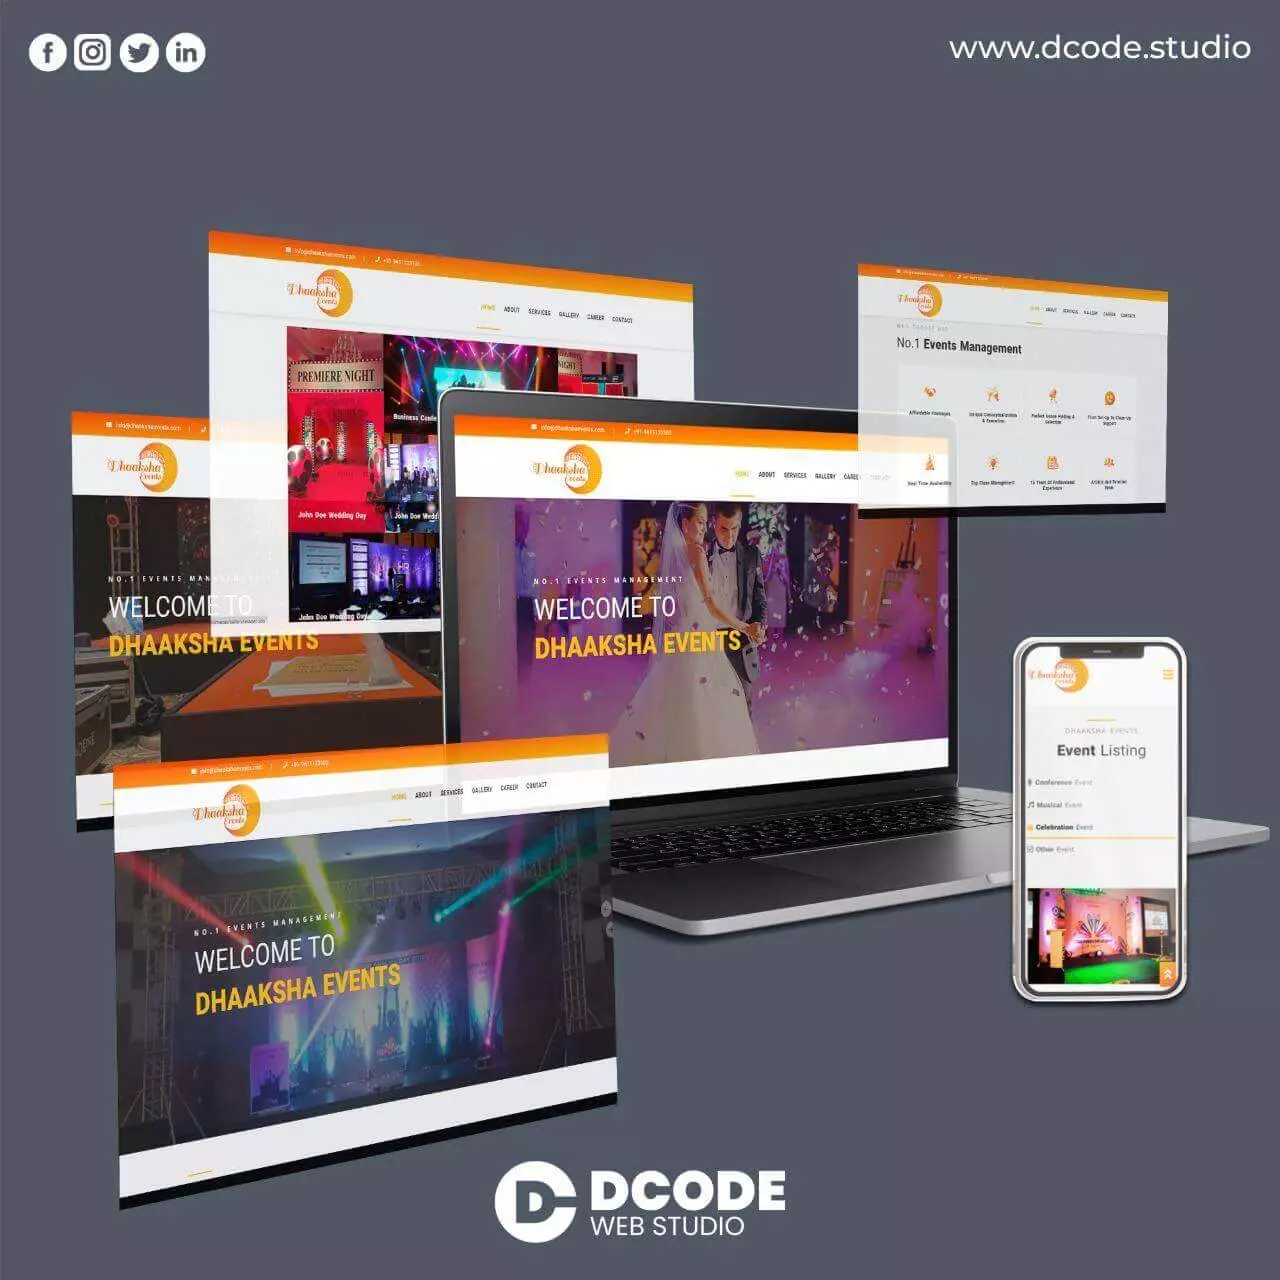 Dhaaksha Events Website Mockup in Laptop, Mobile, and Large Screen Sizes, Designed and Developed by Dcode Web Studio Ahmedabad, Dhaaksha Events Website Designed and Developed by Dcode Web Studio Ahmedabad